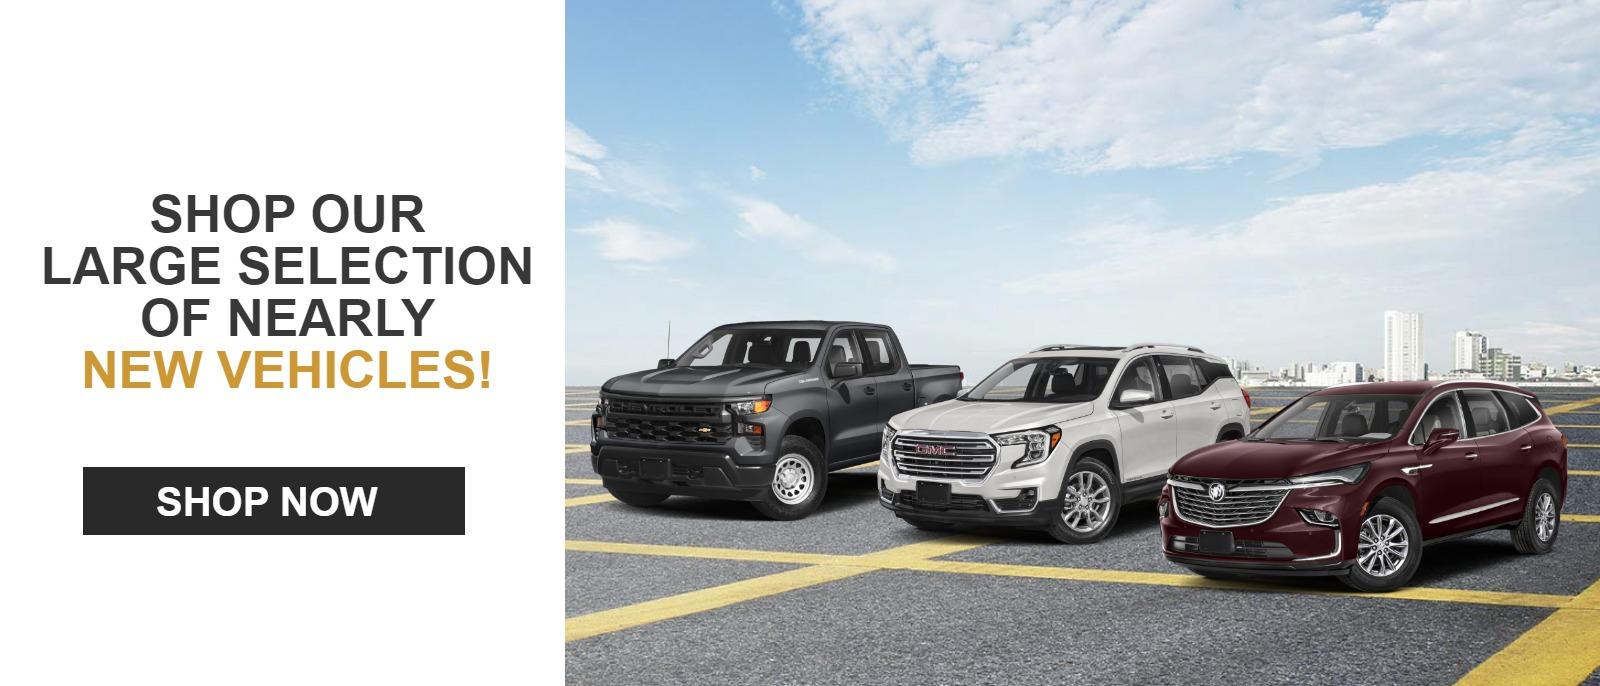 Shop Our Large Selection of Nearly New Vehicles!